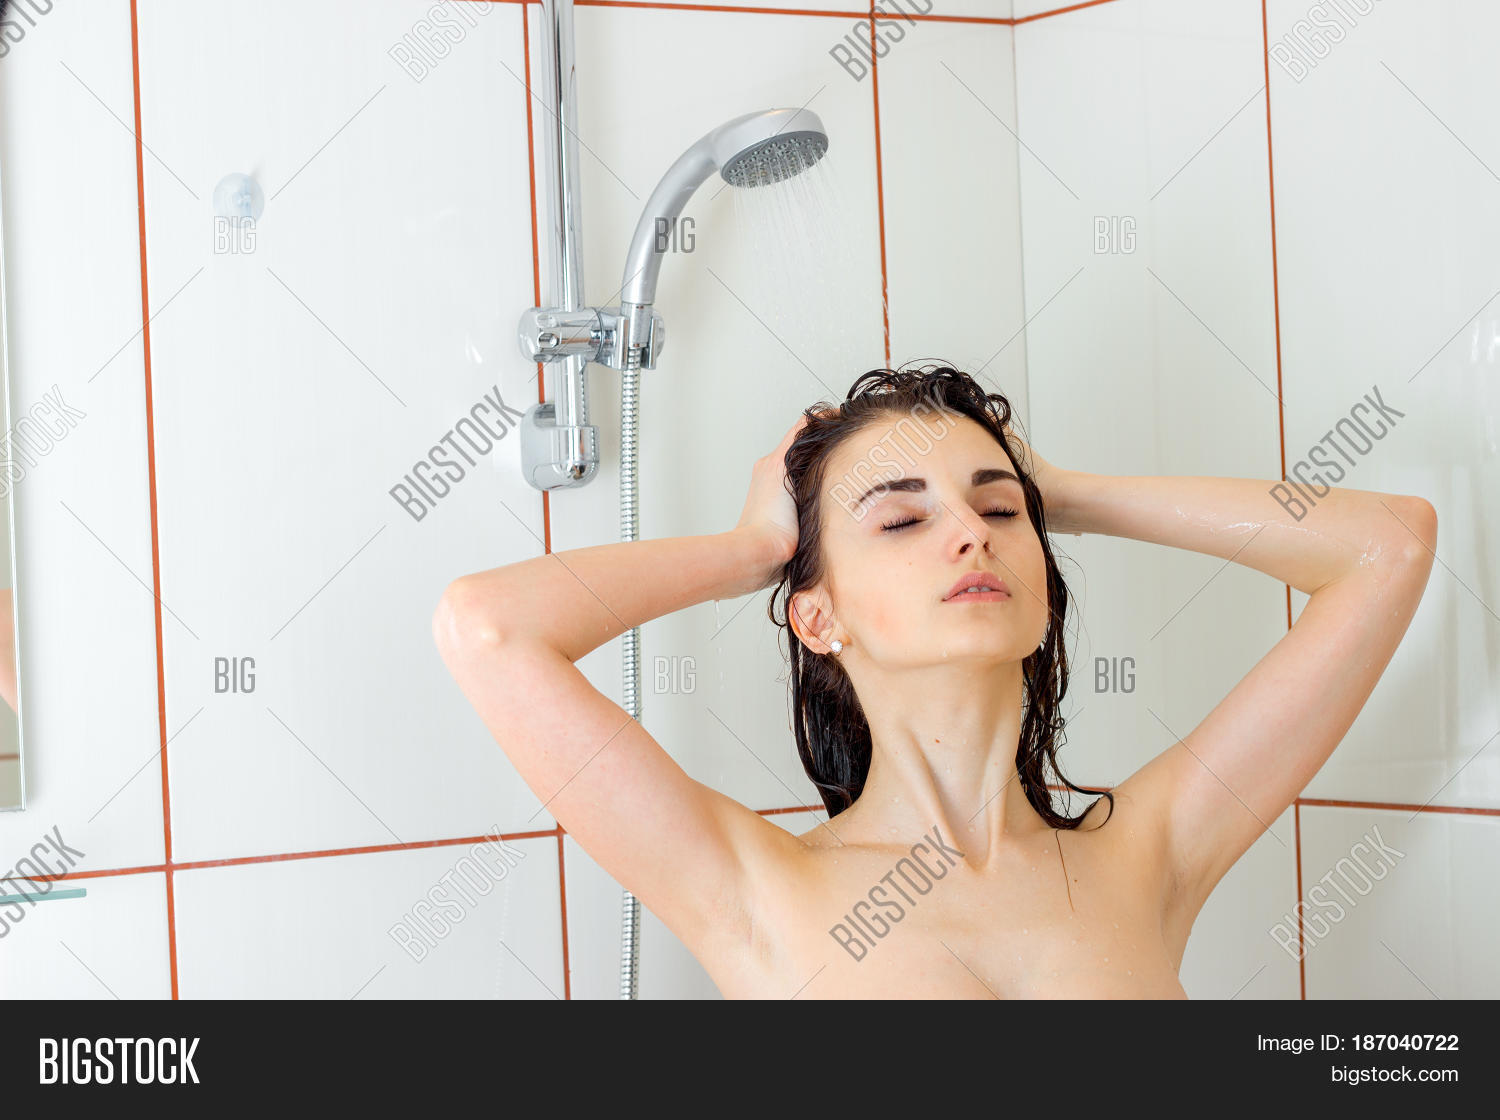 Best of Hot girls in the shower